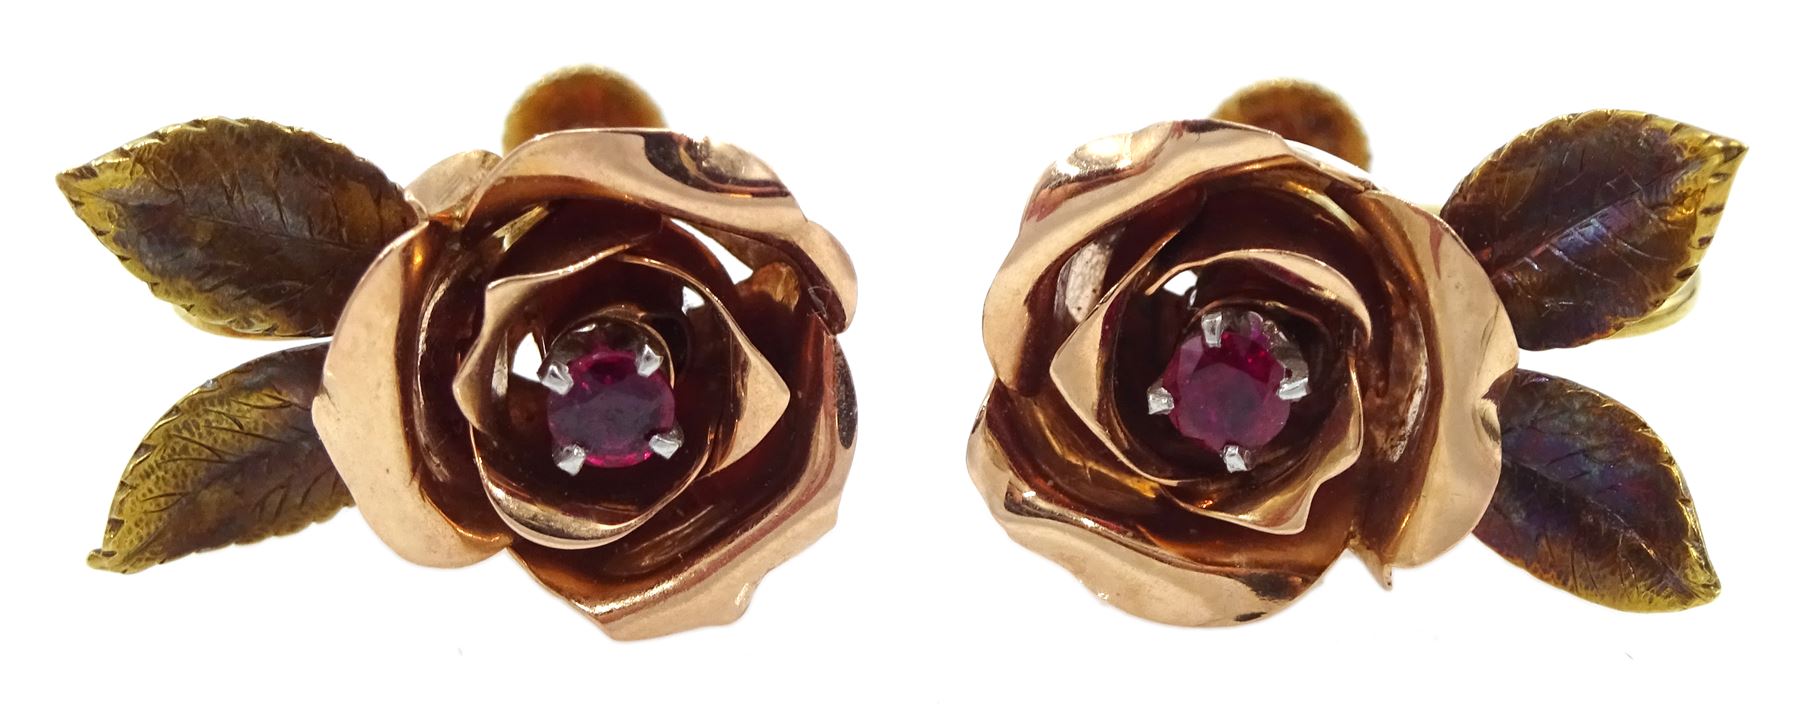 14ct gold yellow and rose gold rose brooch set with a ruby and pair of matching screw back earrings - Image 4 of 7